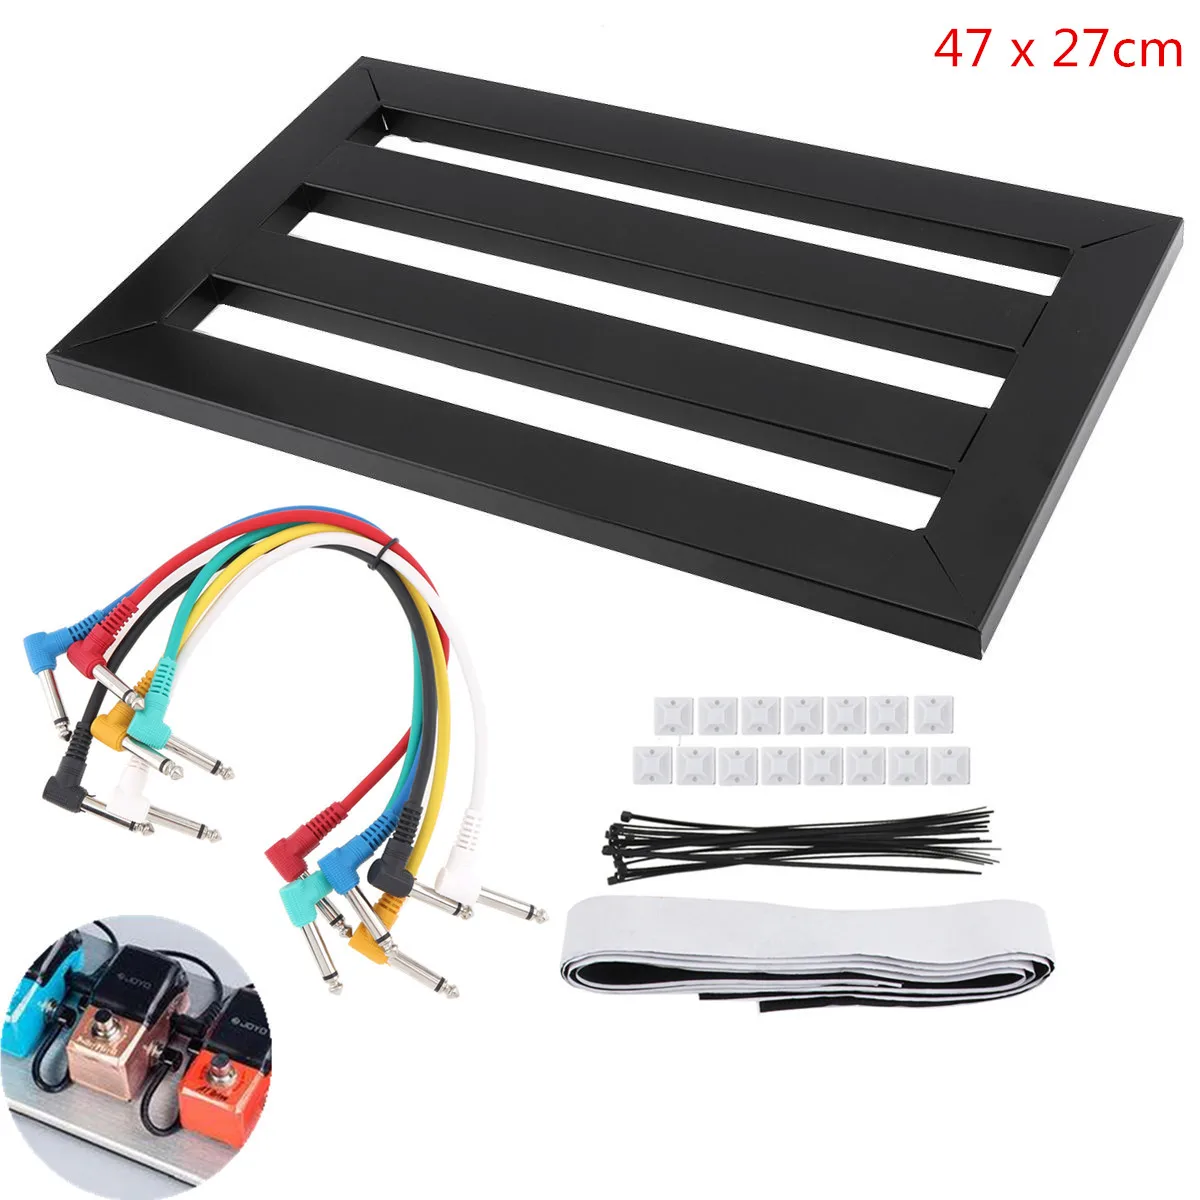 47x27cm Guitar Pedal Board Setup Style DIY Guitar Effect Pedalboard with 6pcs 22cm Patch Cable